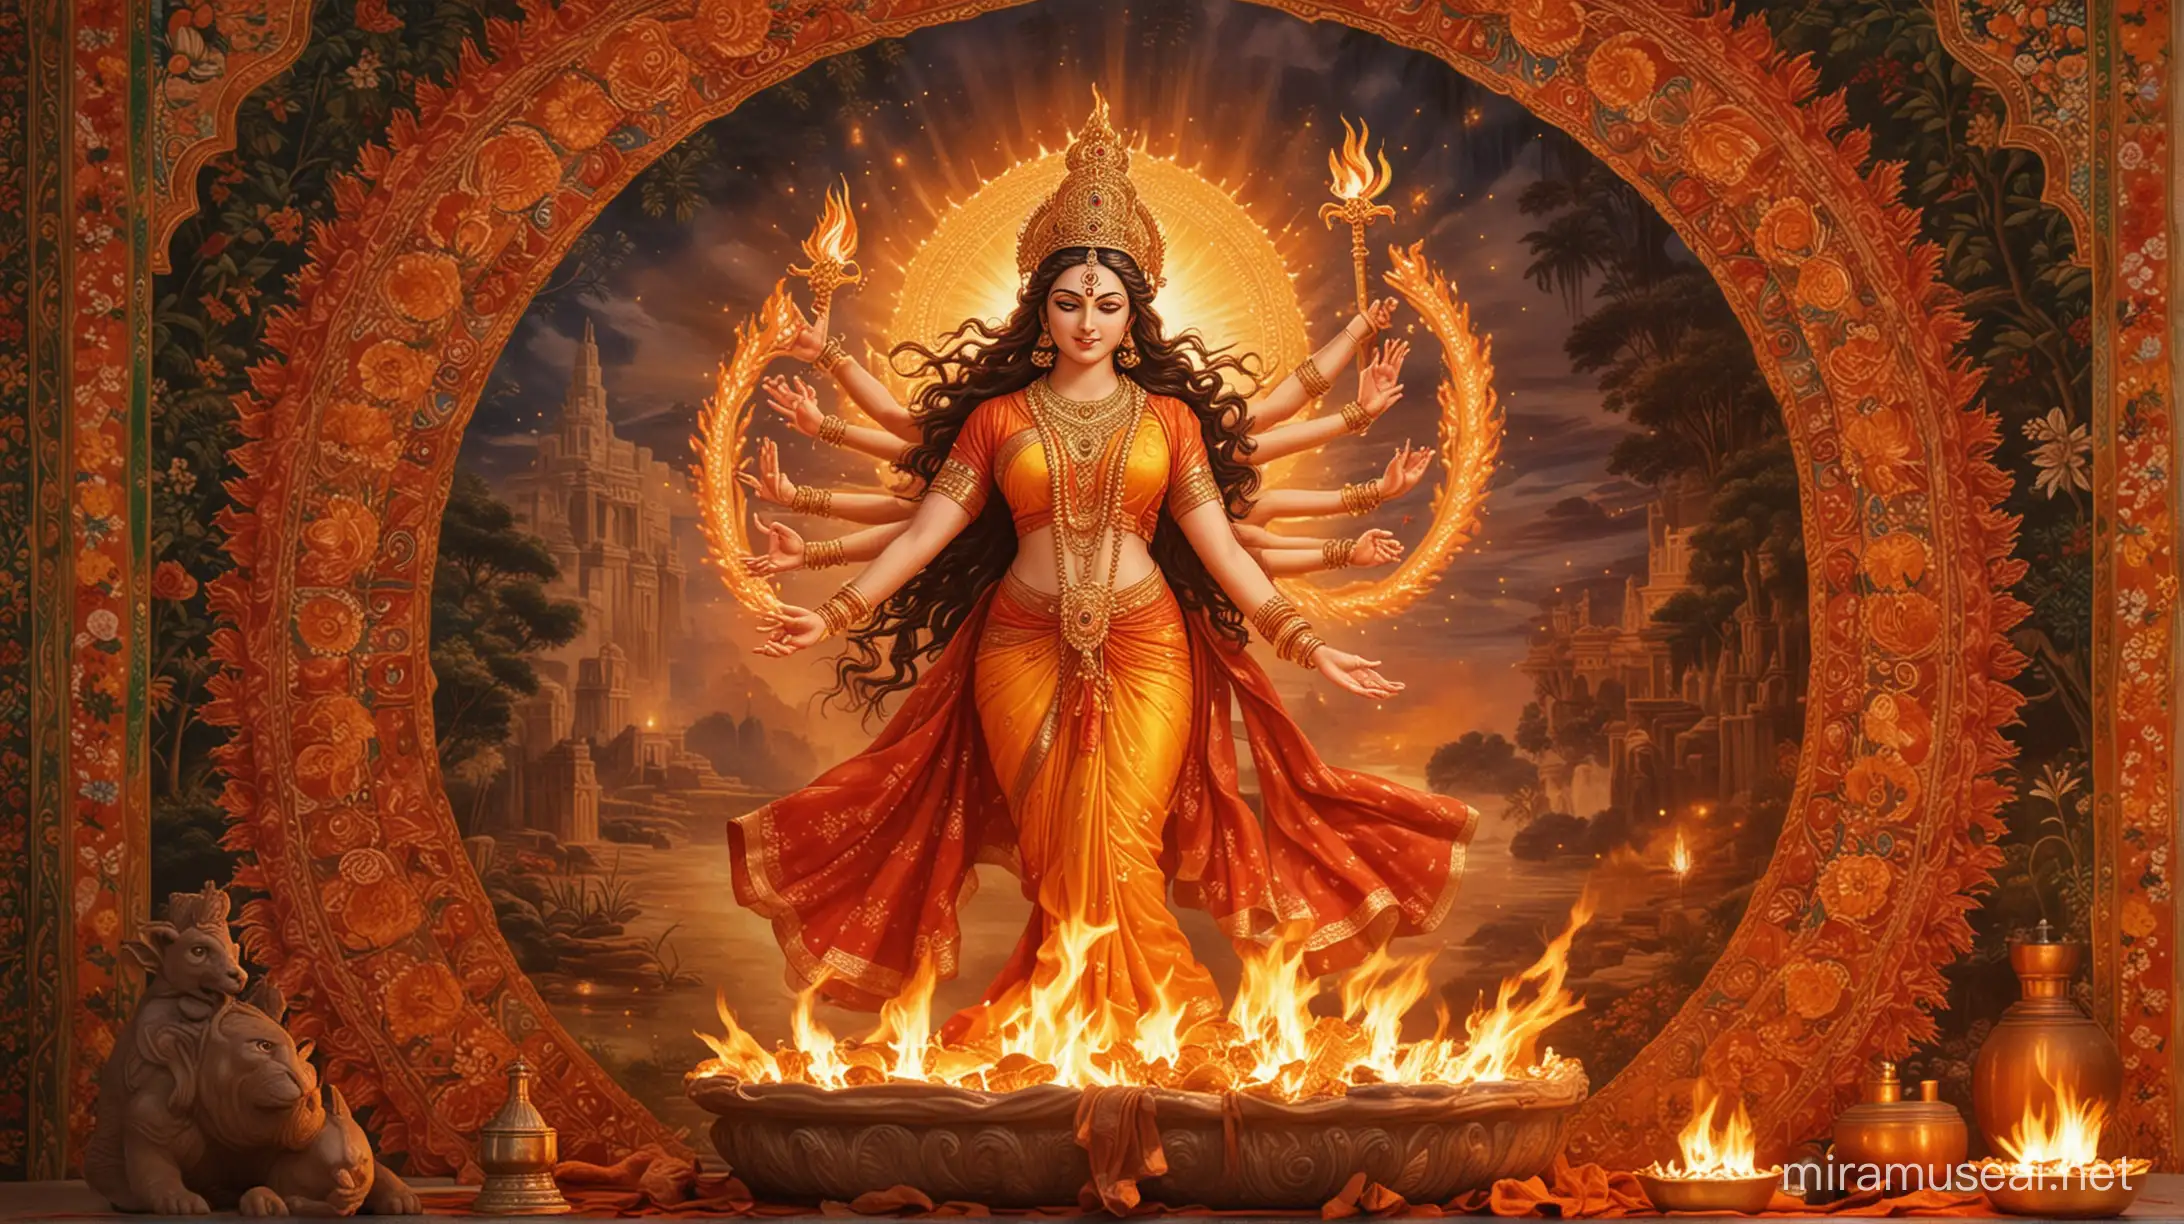 In the serene dawn's light, Goddess Durga's countenance emerges, serene yet powerful, as she melds with the vibrant flames. The backdrop, a tapestry of tranquil hues, frames the scene, enhancing its mystical allure. The fire, alive and vibrant, dances in harmony with the goddess, illuminating her features with clarity and grace. A captivating tableau of divine connection, inviting admiration and contemplation of earthly harmony and spiritual